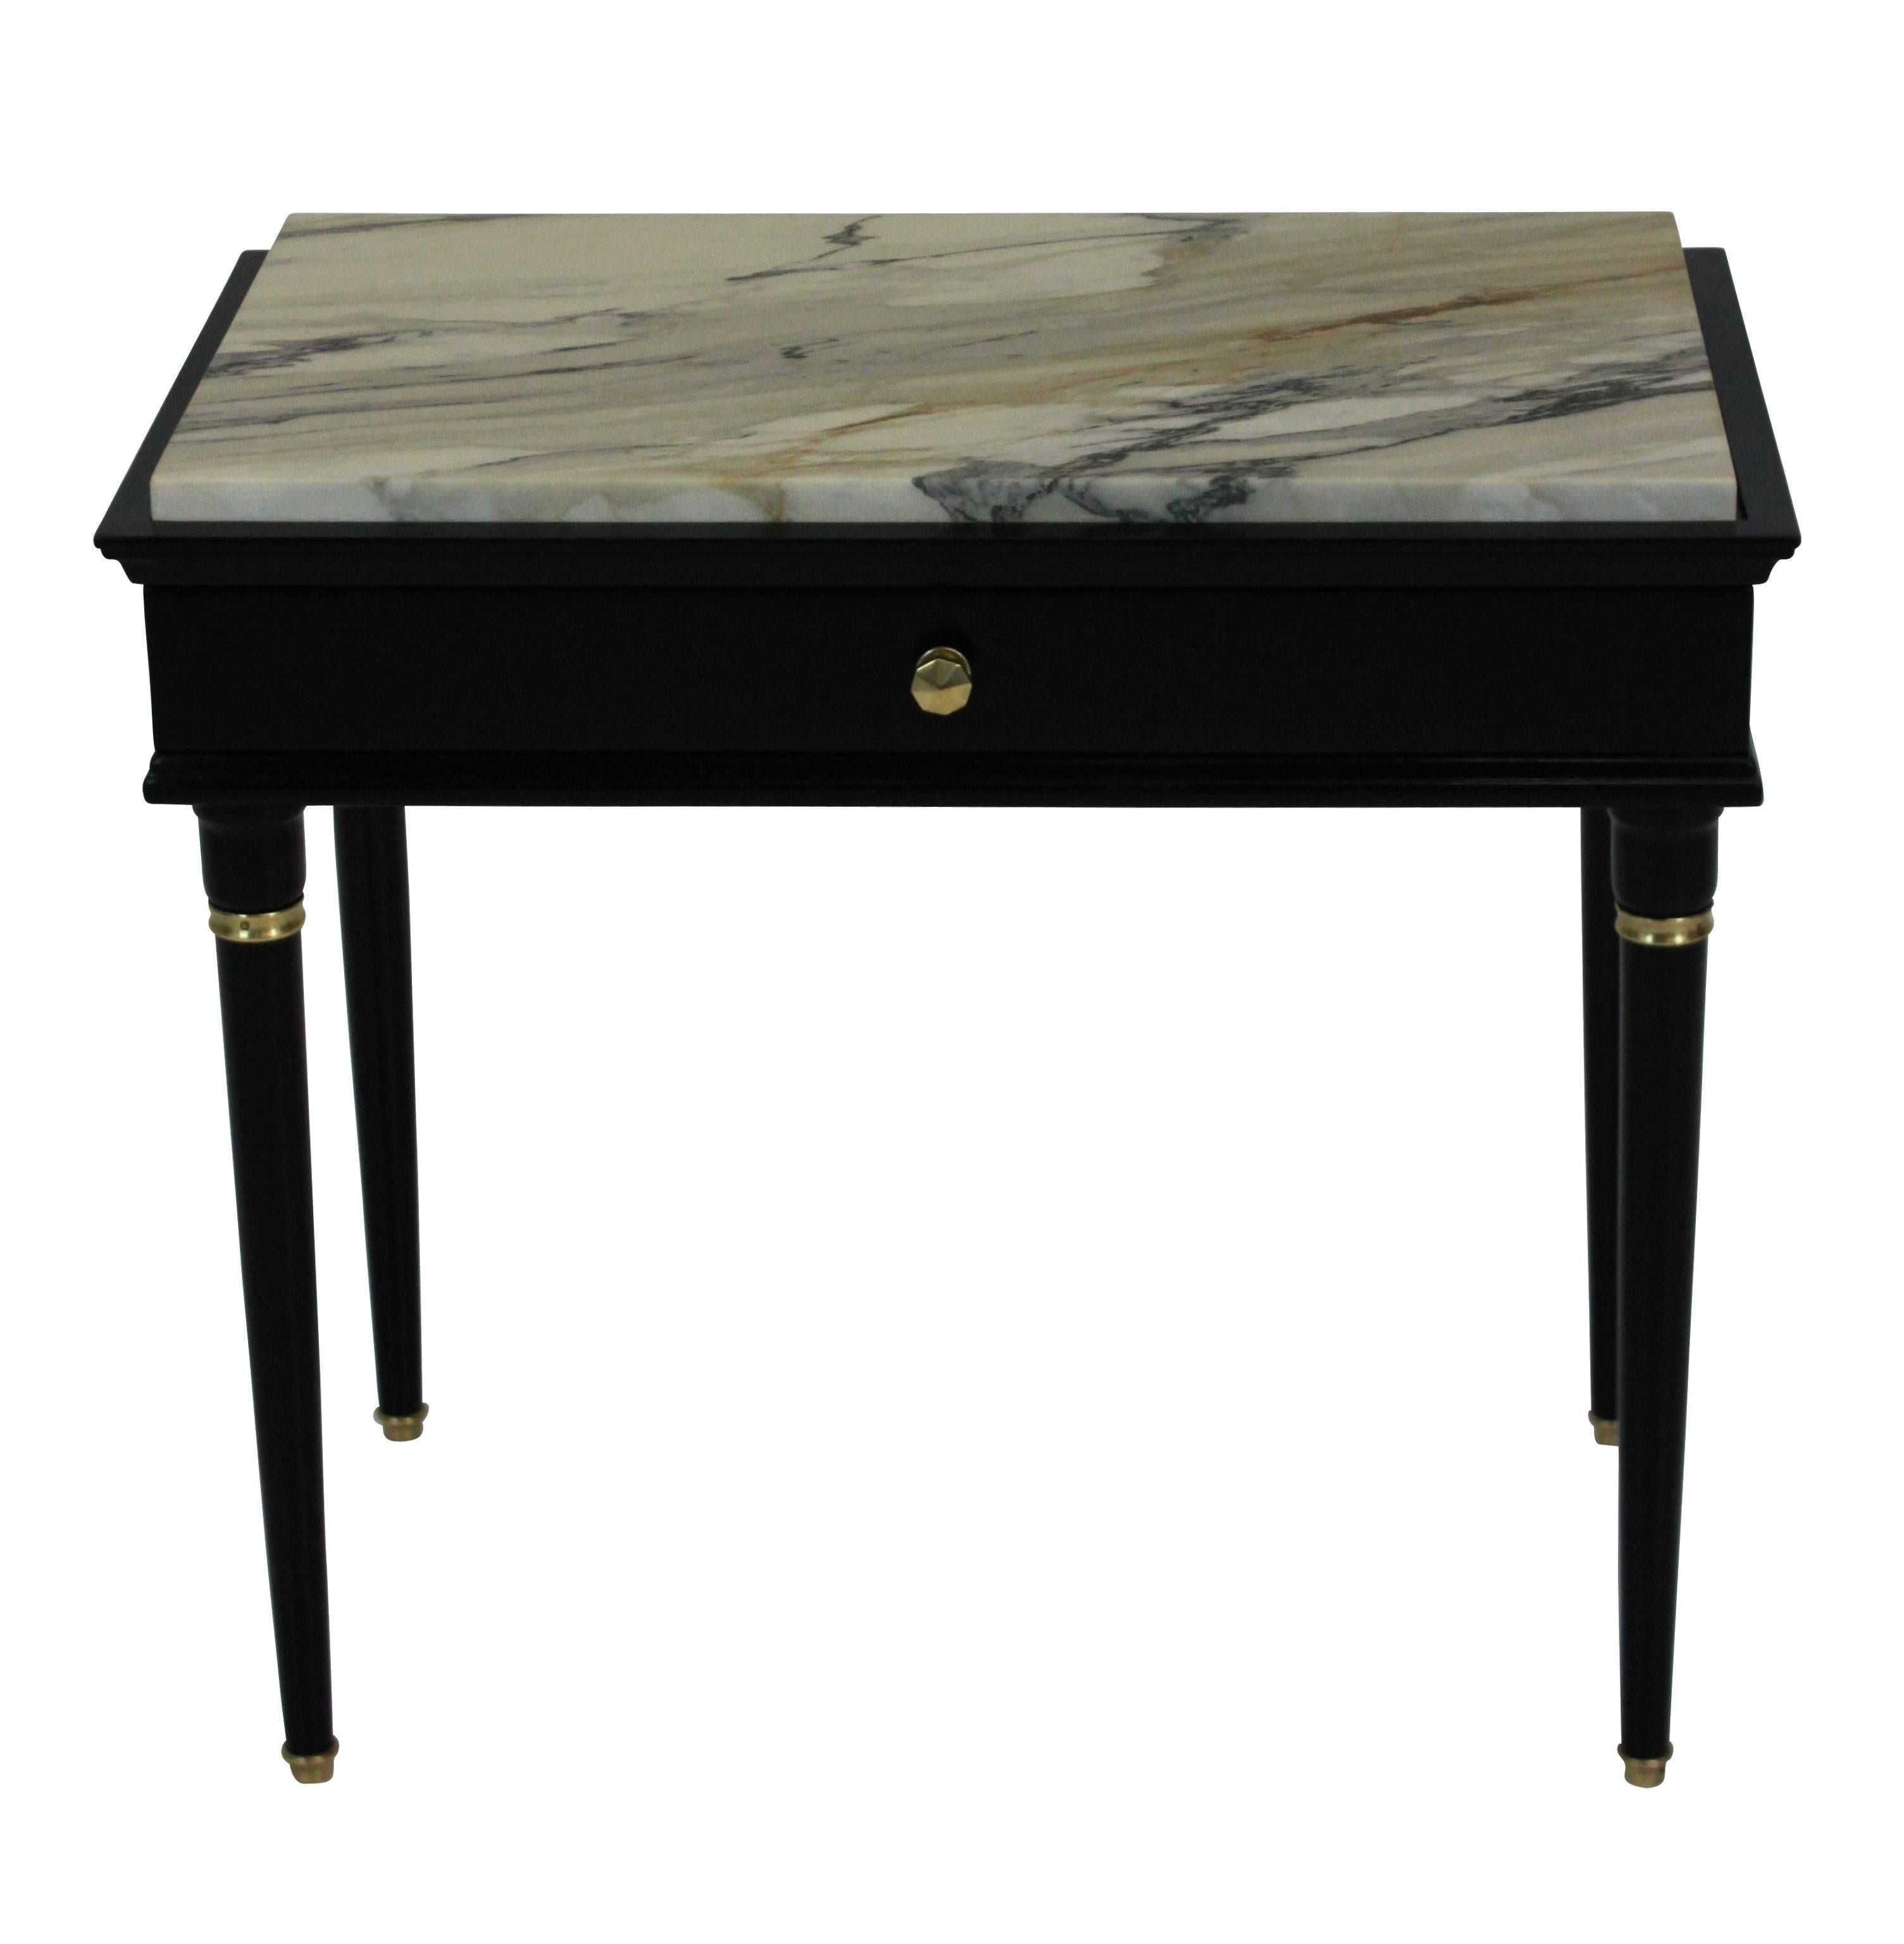 A pair of stylish French Mid-Century nightstands in ebonized wood and brass fittings. With a single frieze drawer and good marble tops.
        